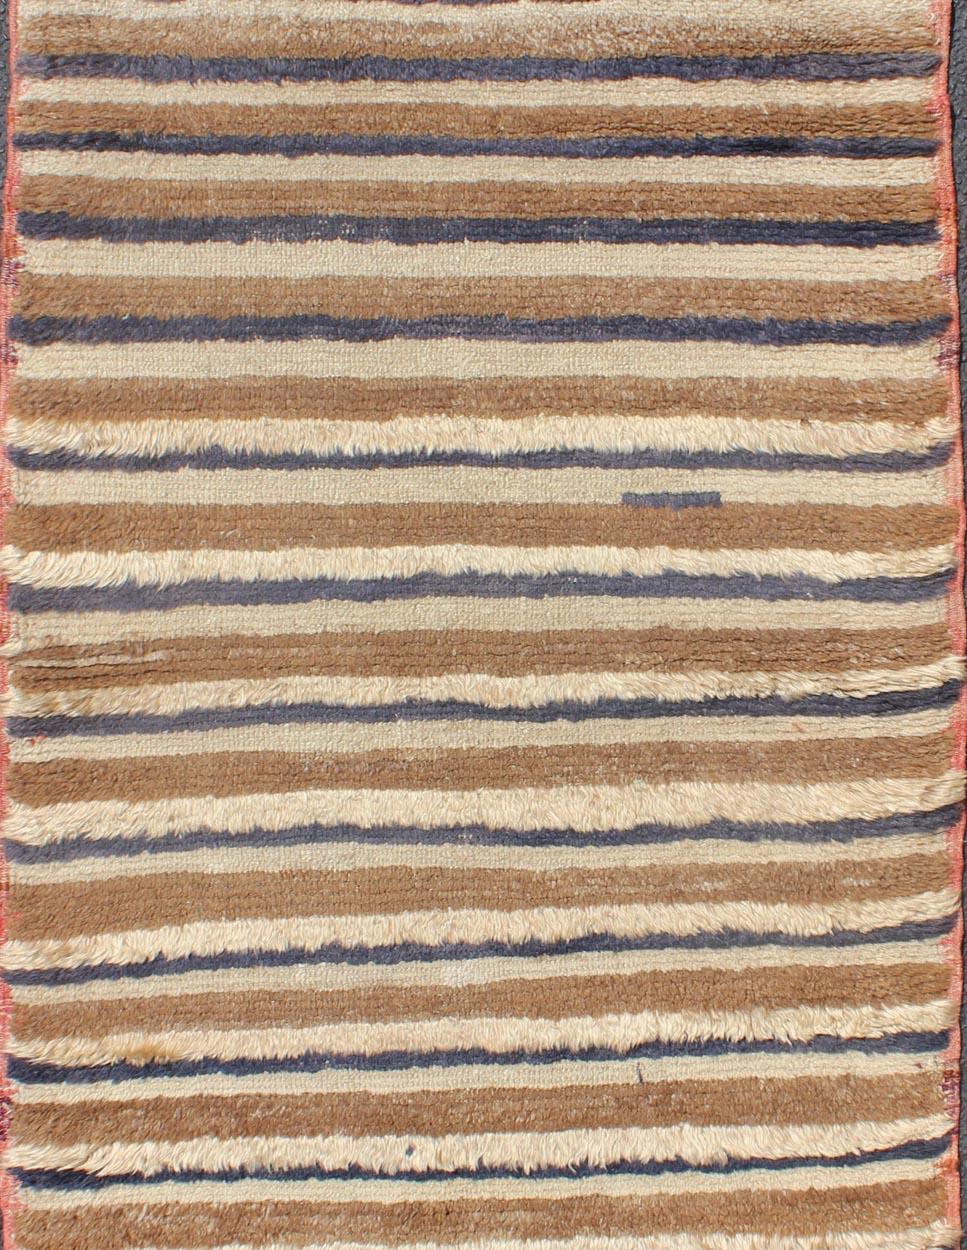 Turkish Angora Tulu Vintage Carpet with Stripe Pattern Light Brown & Navy Blue In Excellent Condition For Sale In Atlanta, GA